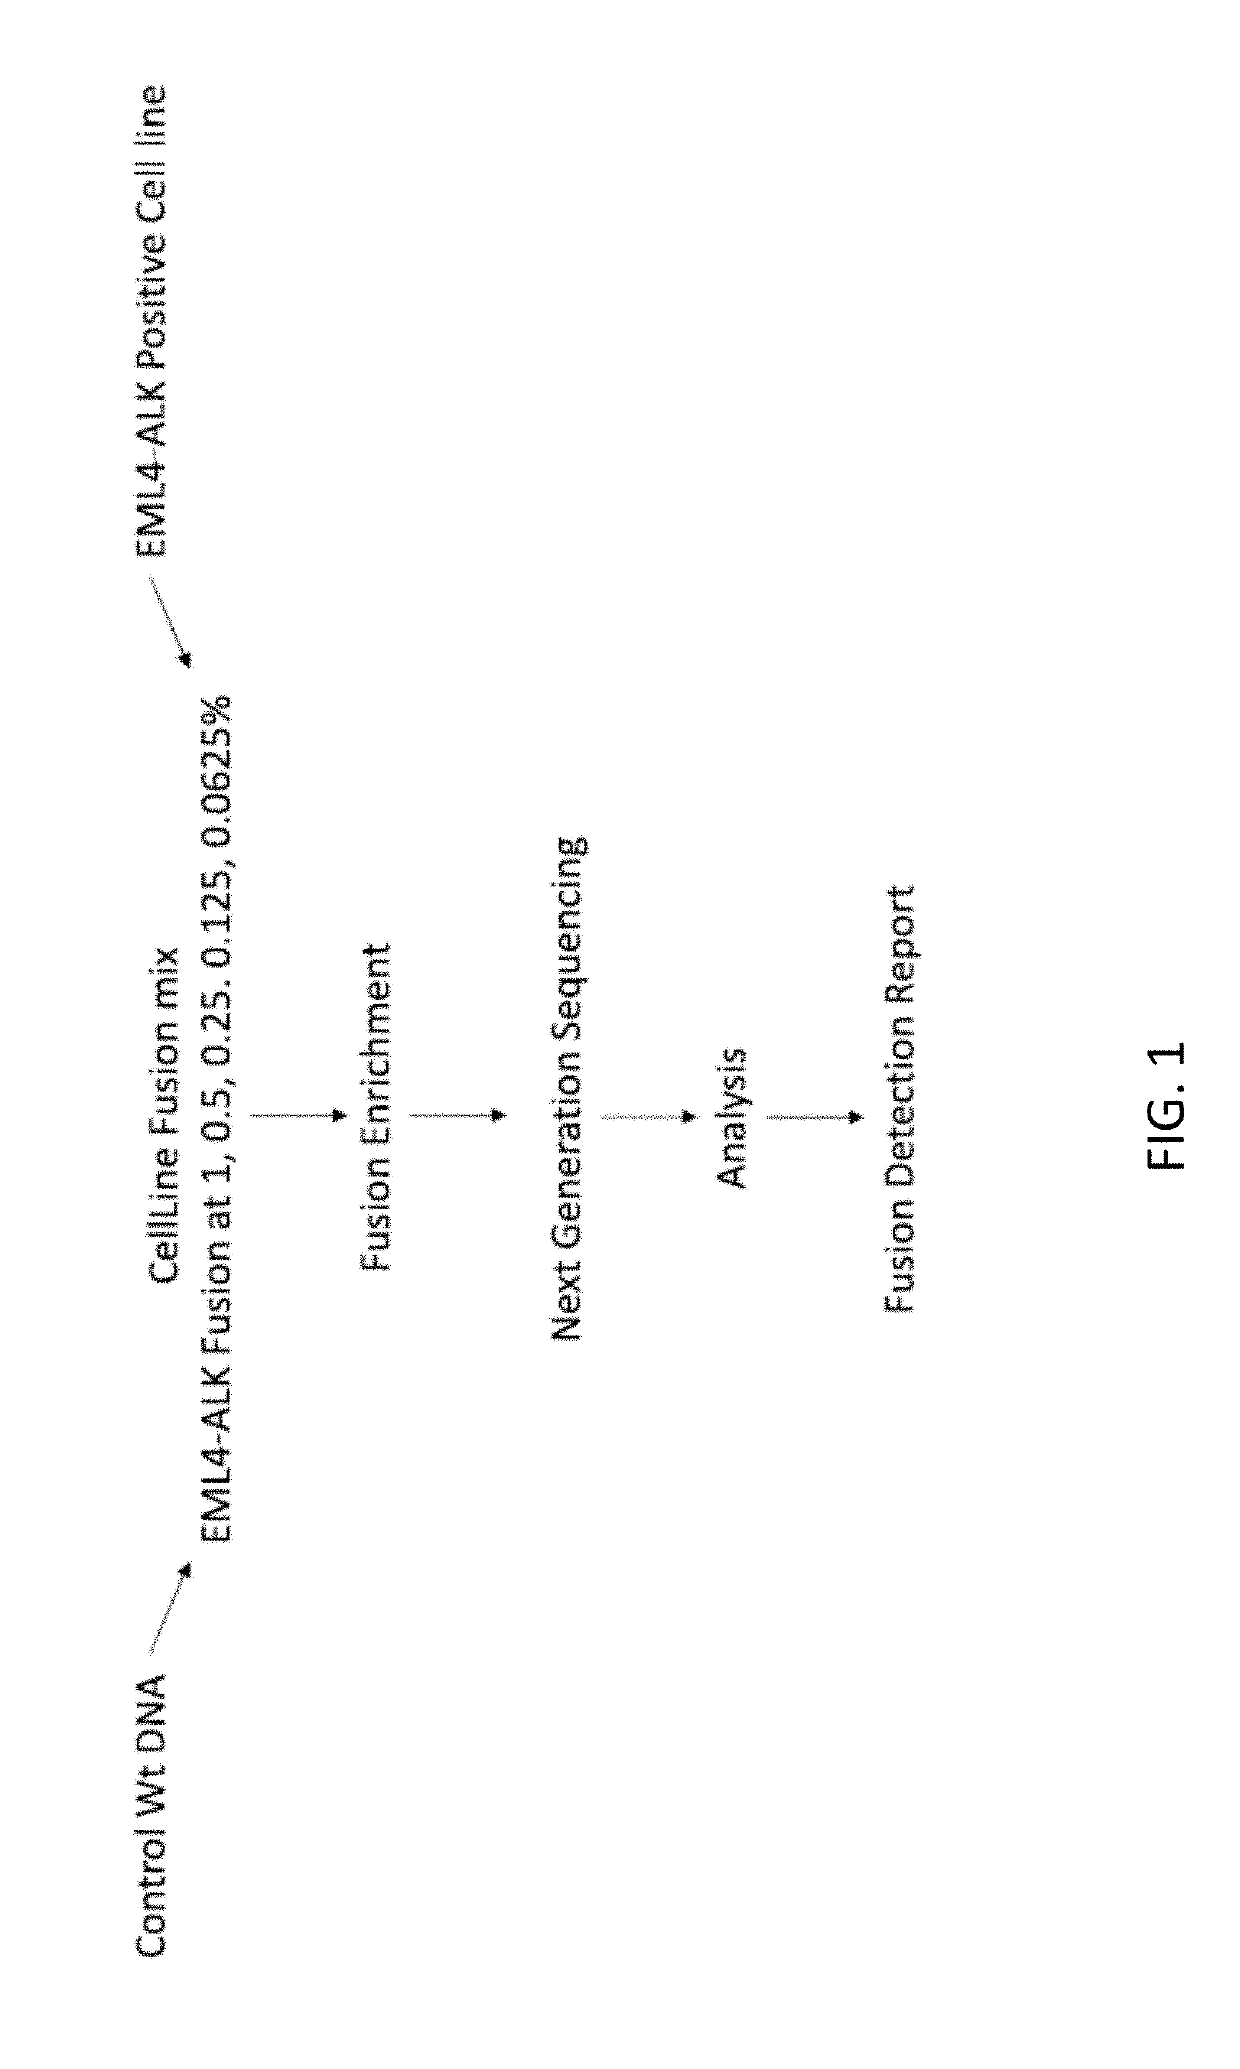 Method for Detecting a Genomic Fusion Event